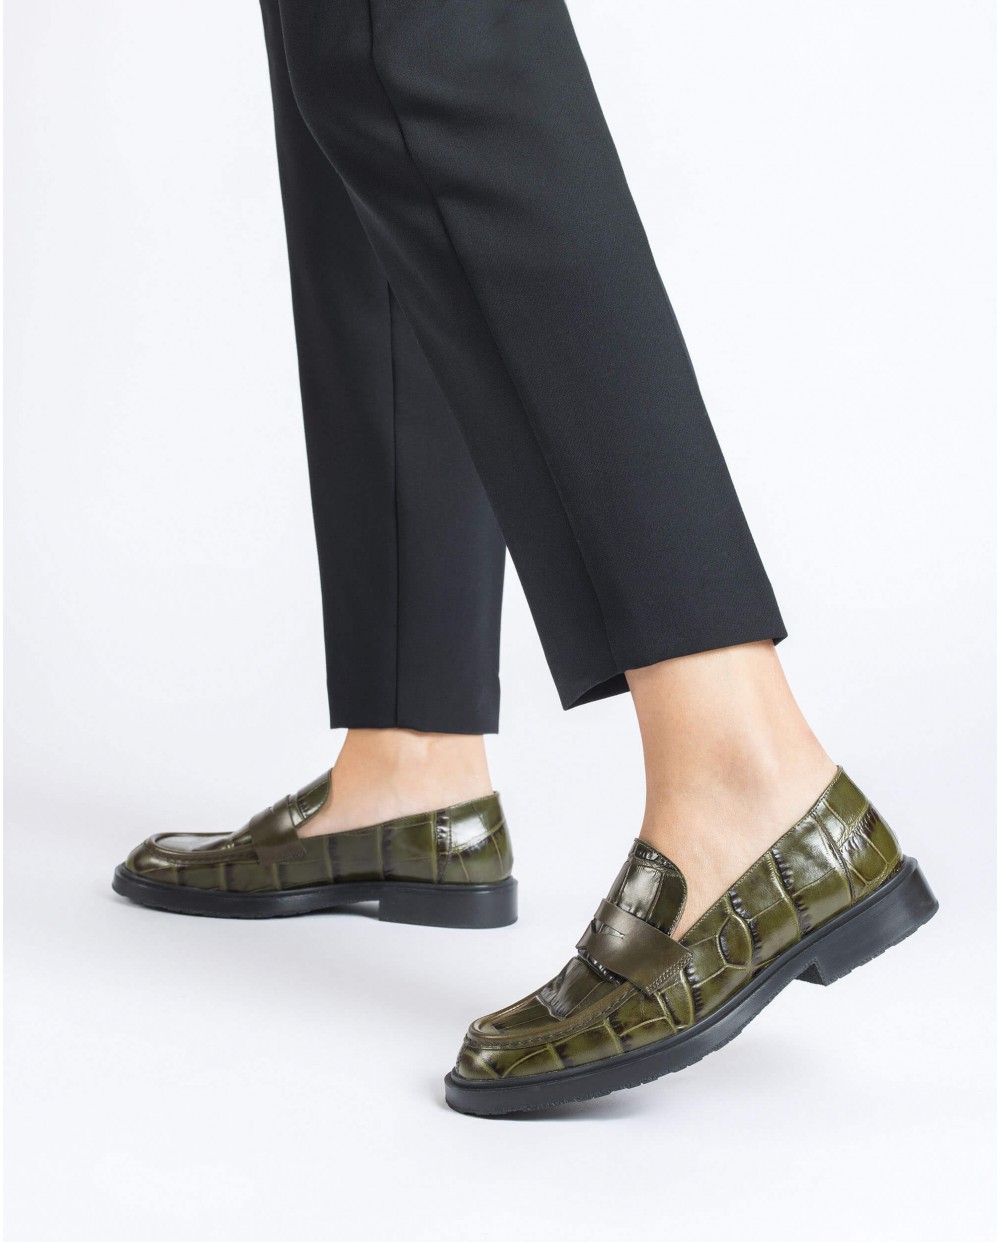 Green Ned Croc Moccasin